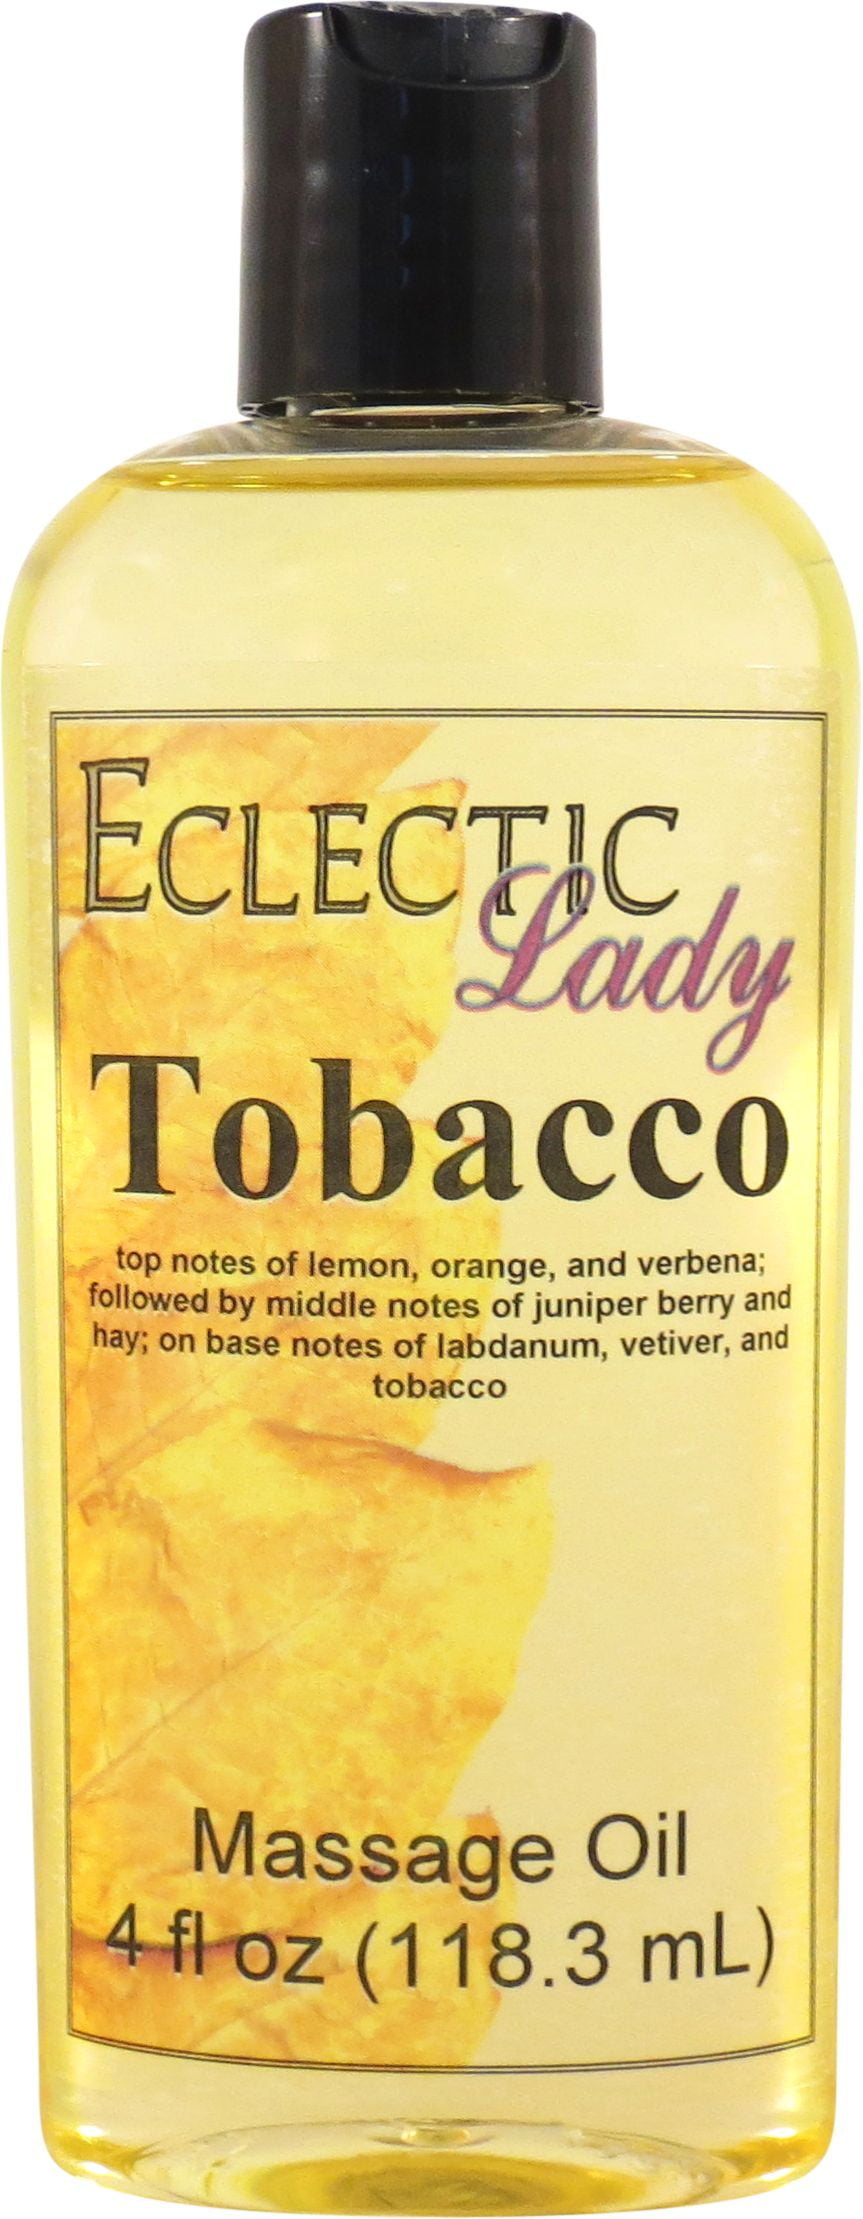 Tobacco Massage Oil by Eclectic Lady, 8 oz, Sweet Almond Oil and Jojoba Oil, Adult Unisex, Size: 8 Ounces, Gold